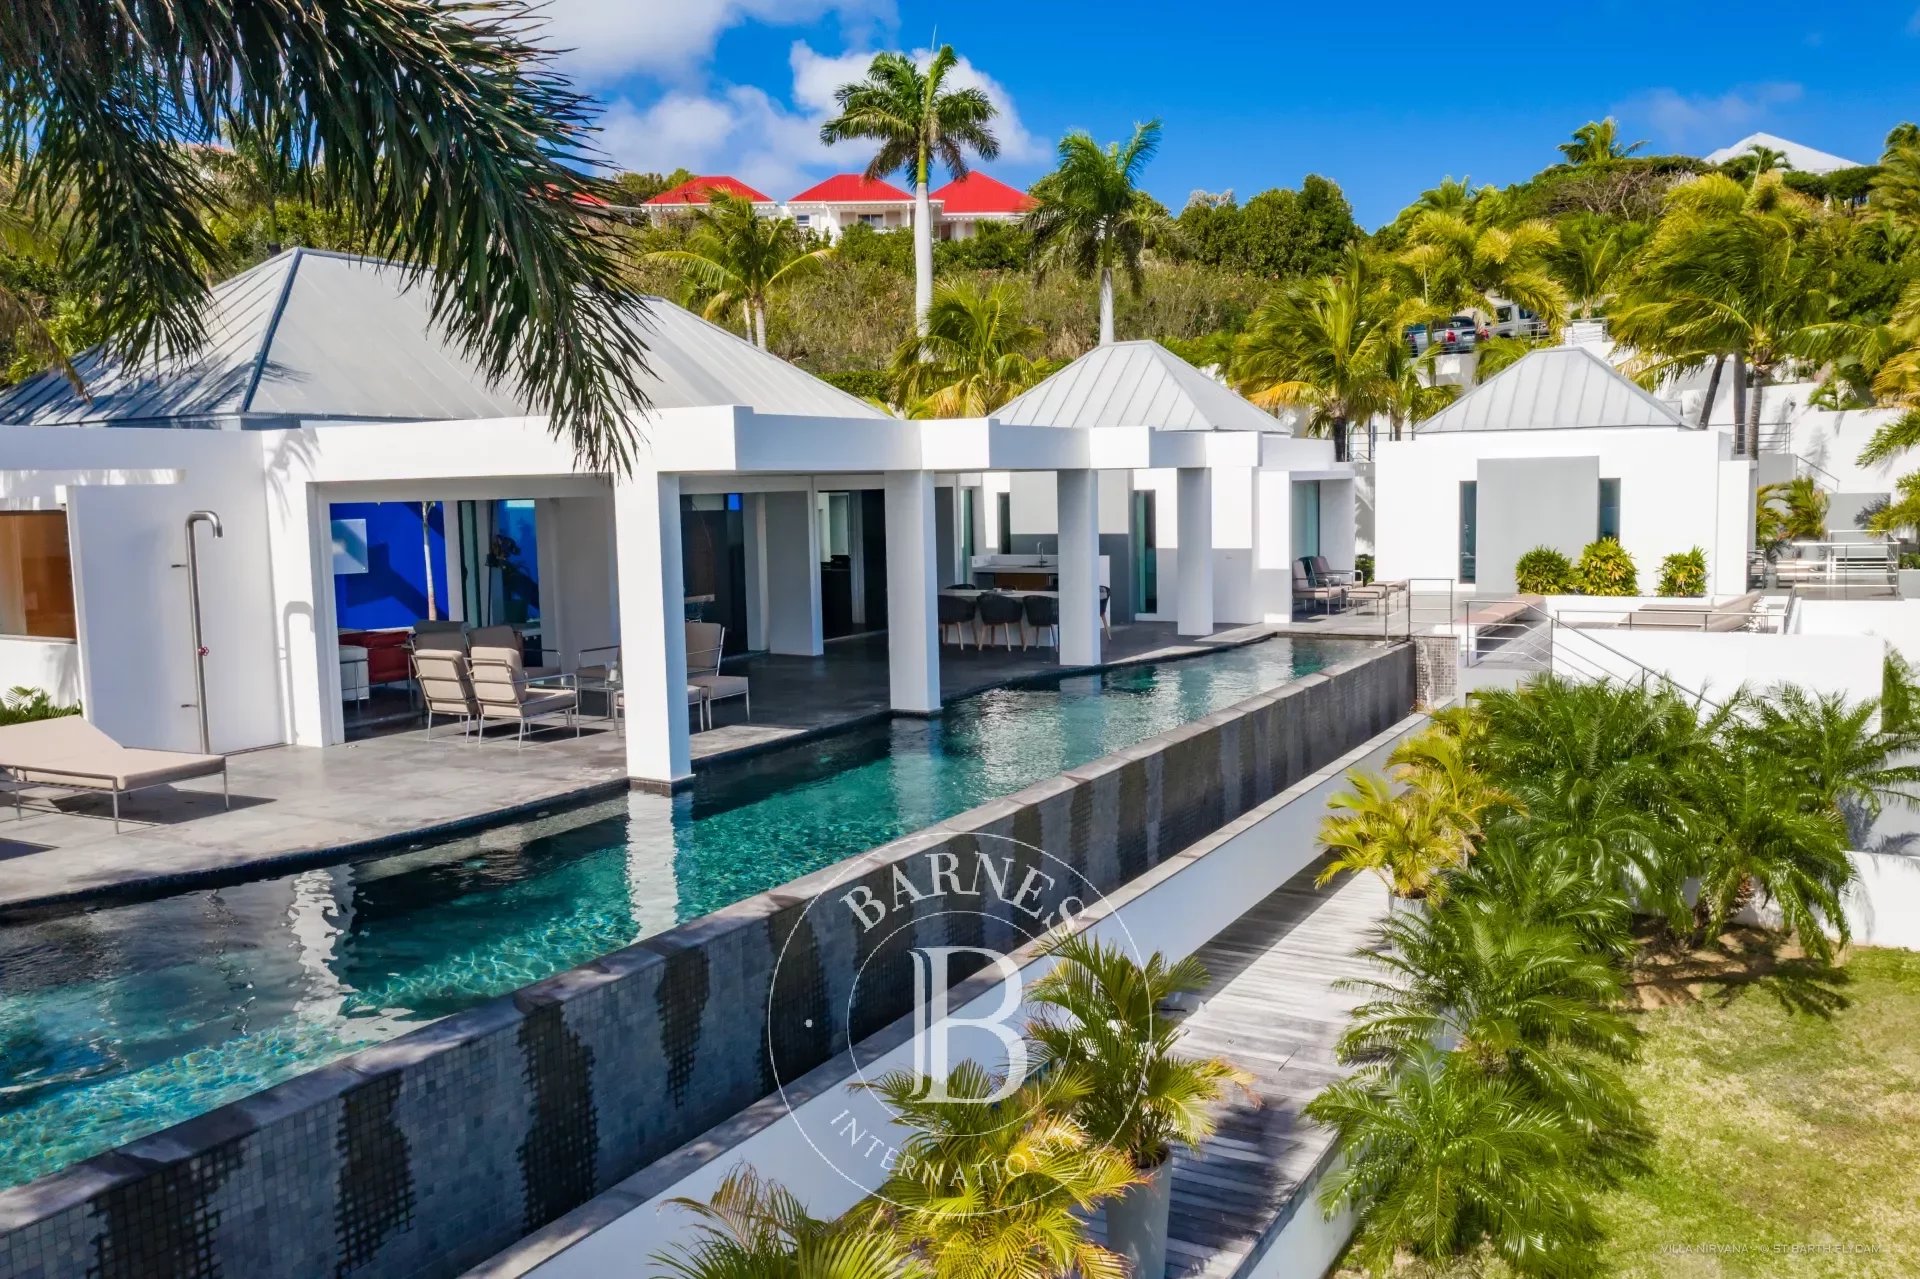 5-Bedroom Villa in St.Barths - picture 5 title=